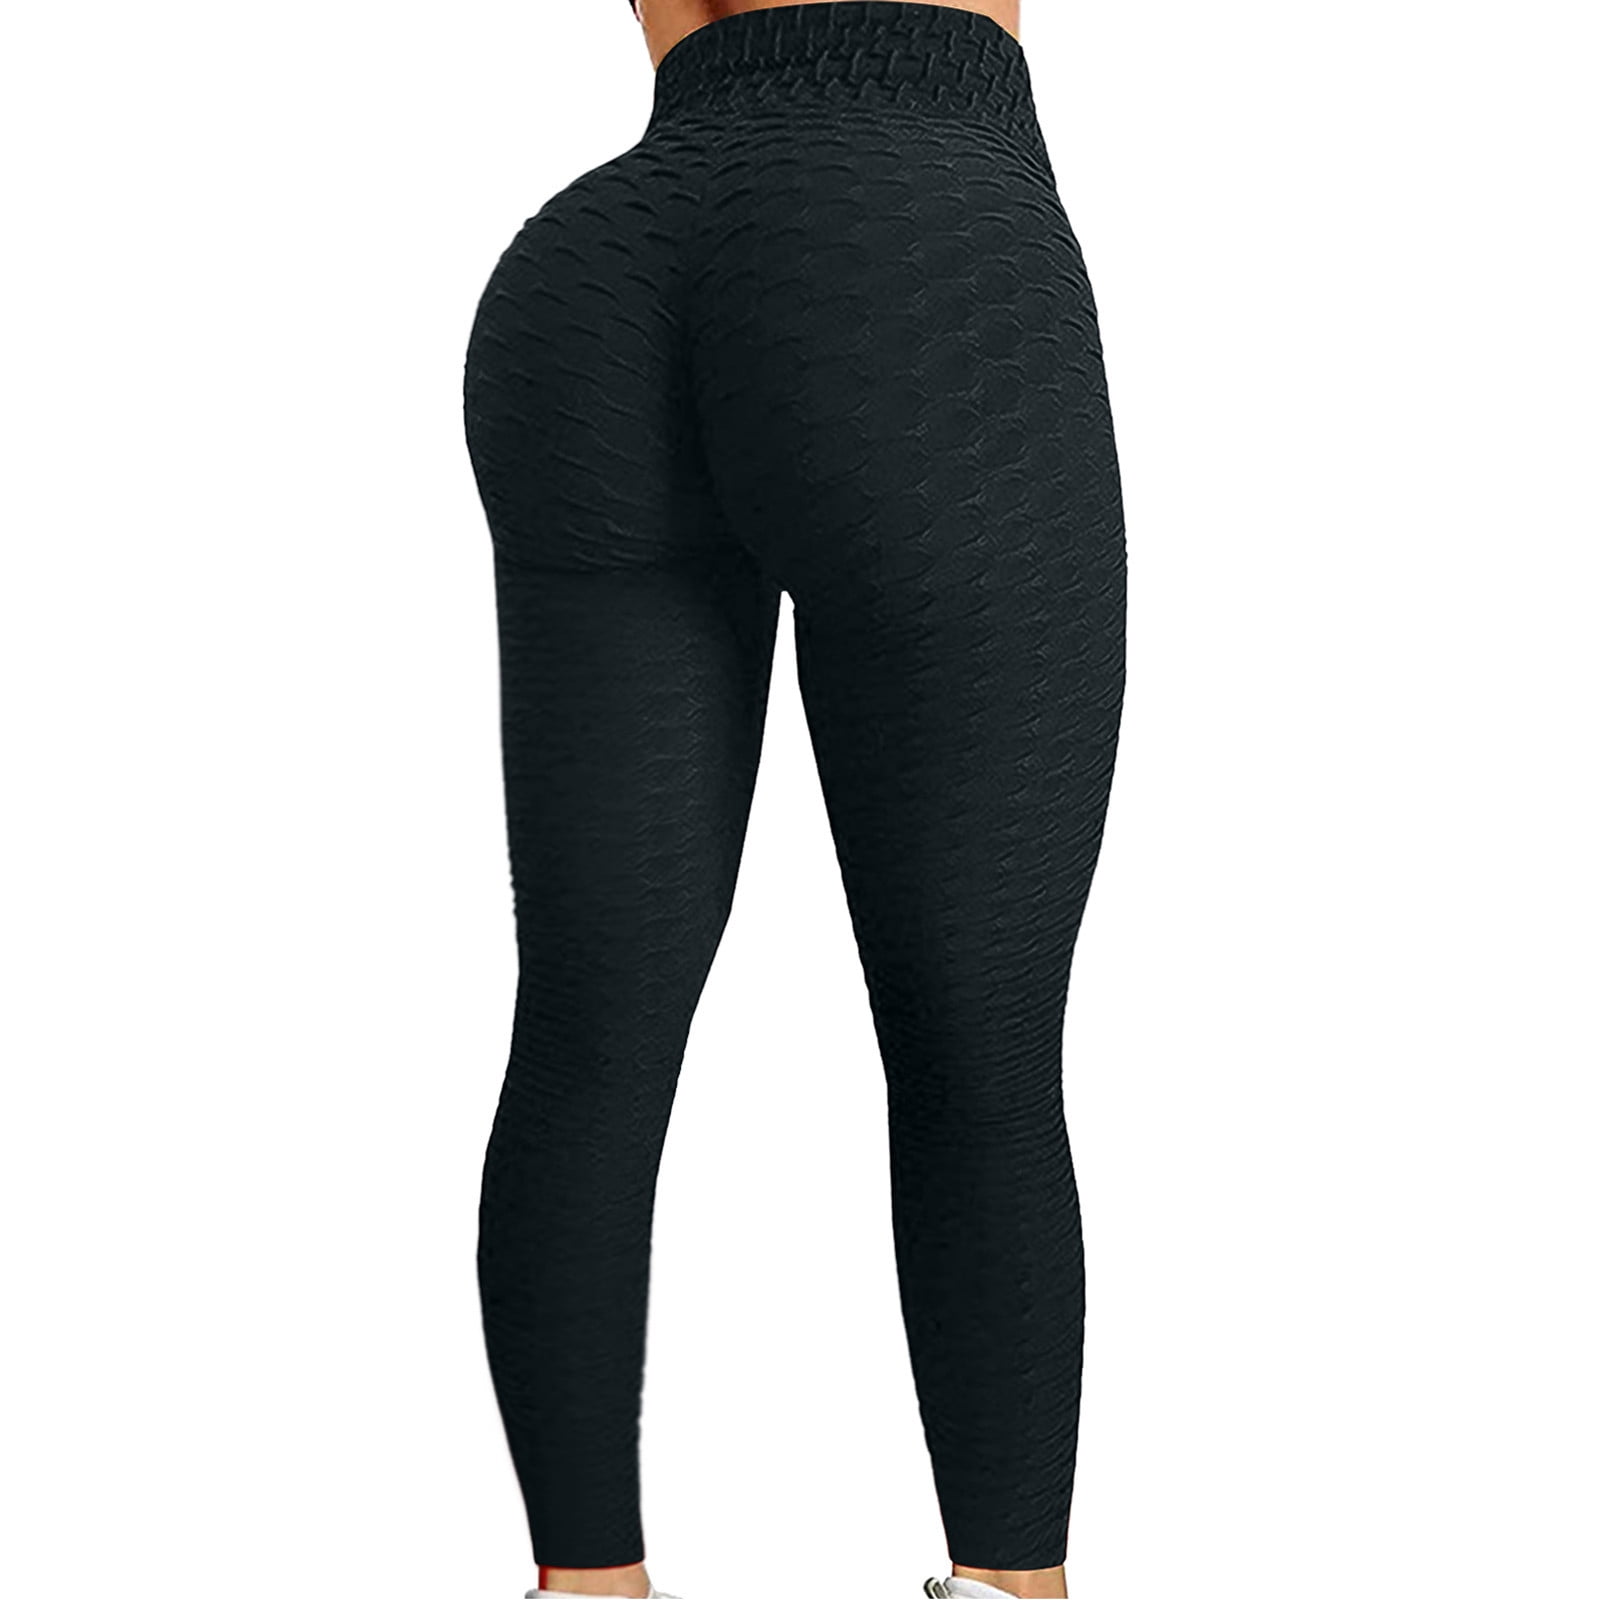 Joggers for Women Sweatpants Women's Bubble Hip Lifting Exercise Fitness  Running High Waist Yoga Pants Leggings with Pockets for Women Womens  Joggers